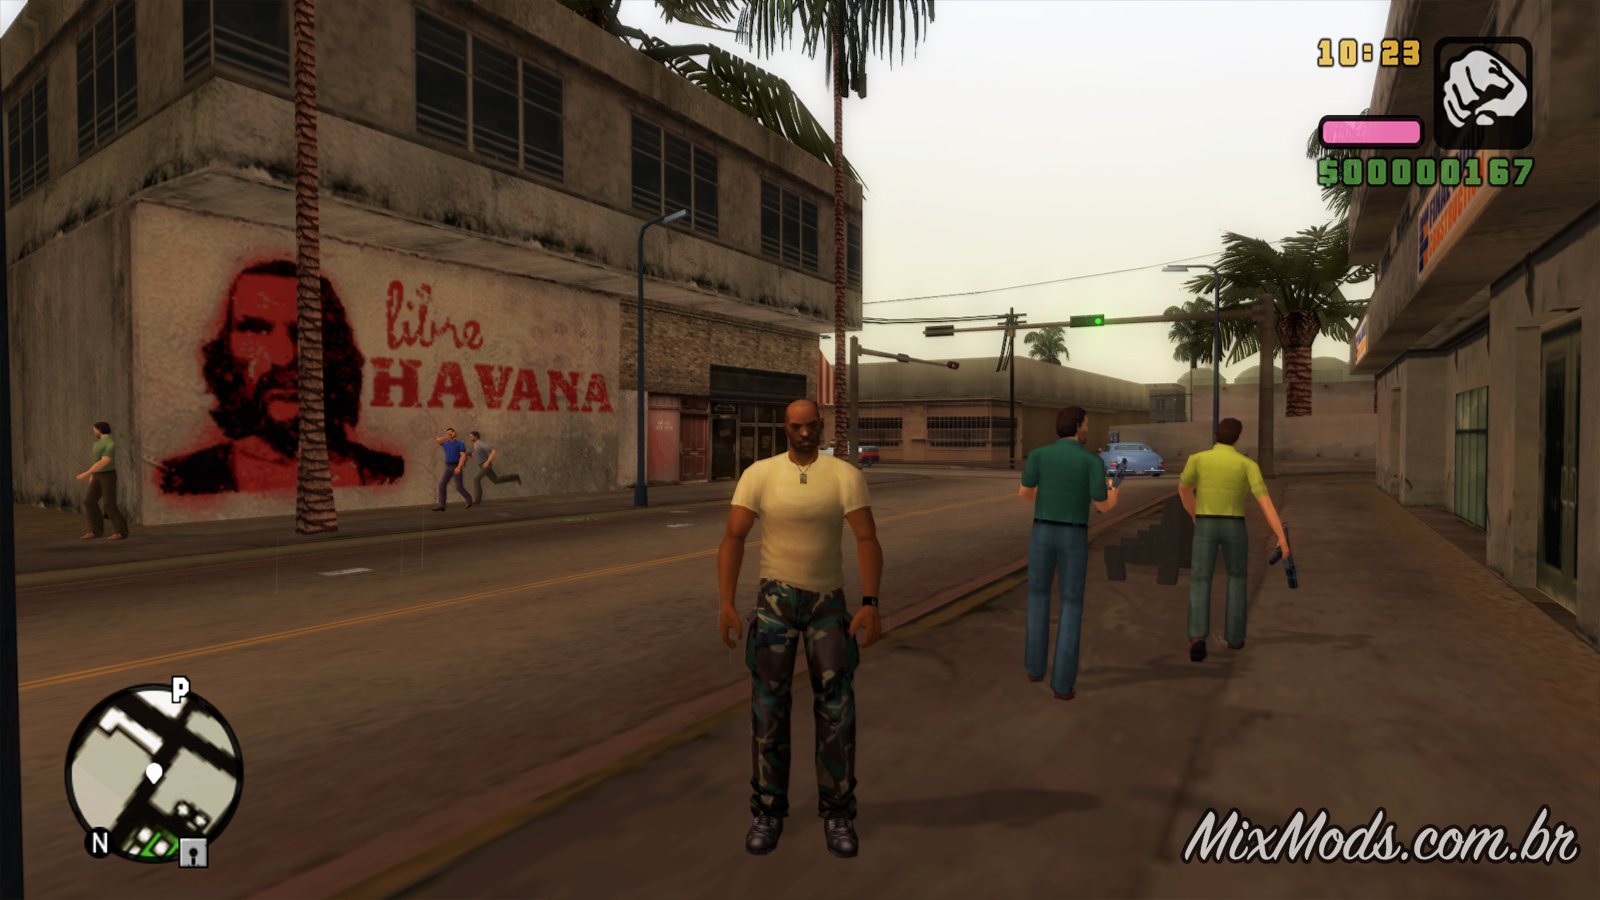 GTA Liberty City Stories & Vice City Stories PC Editions (based on